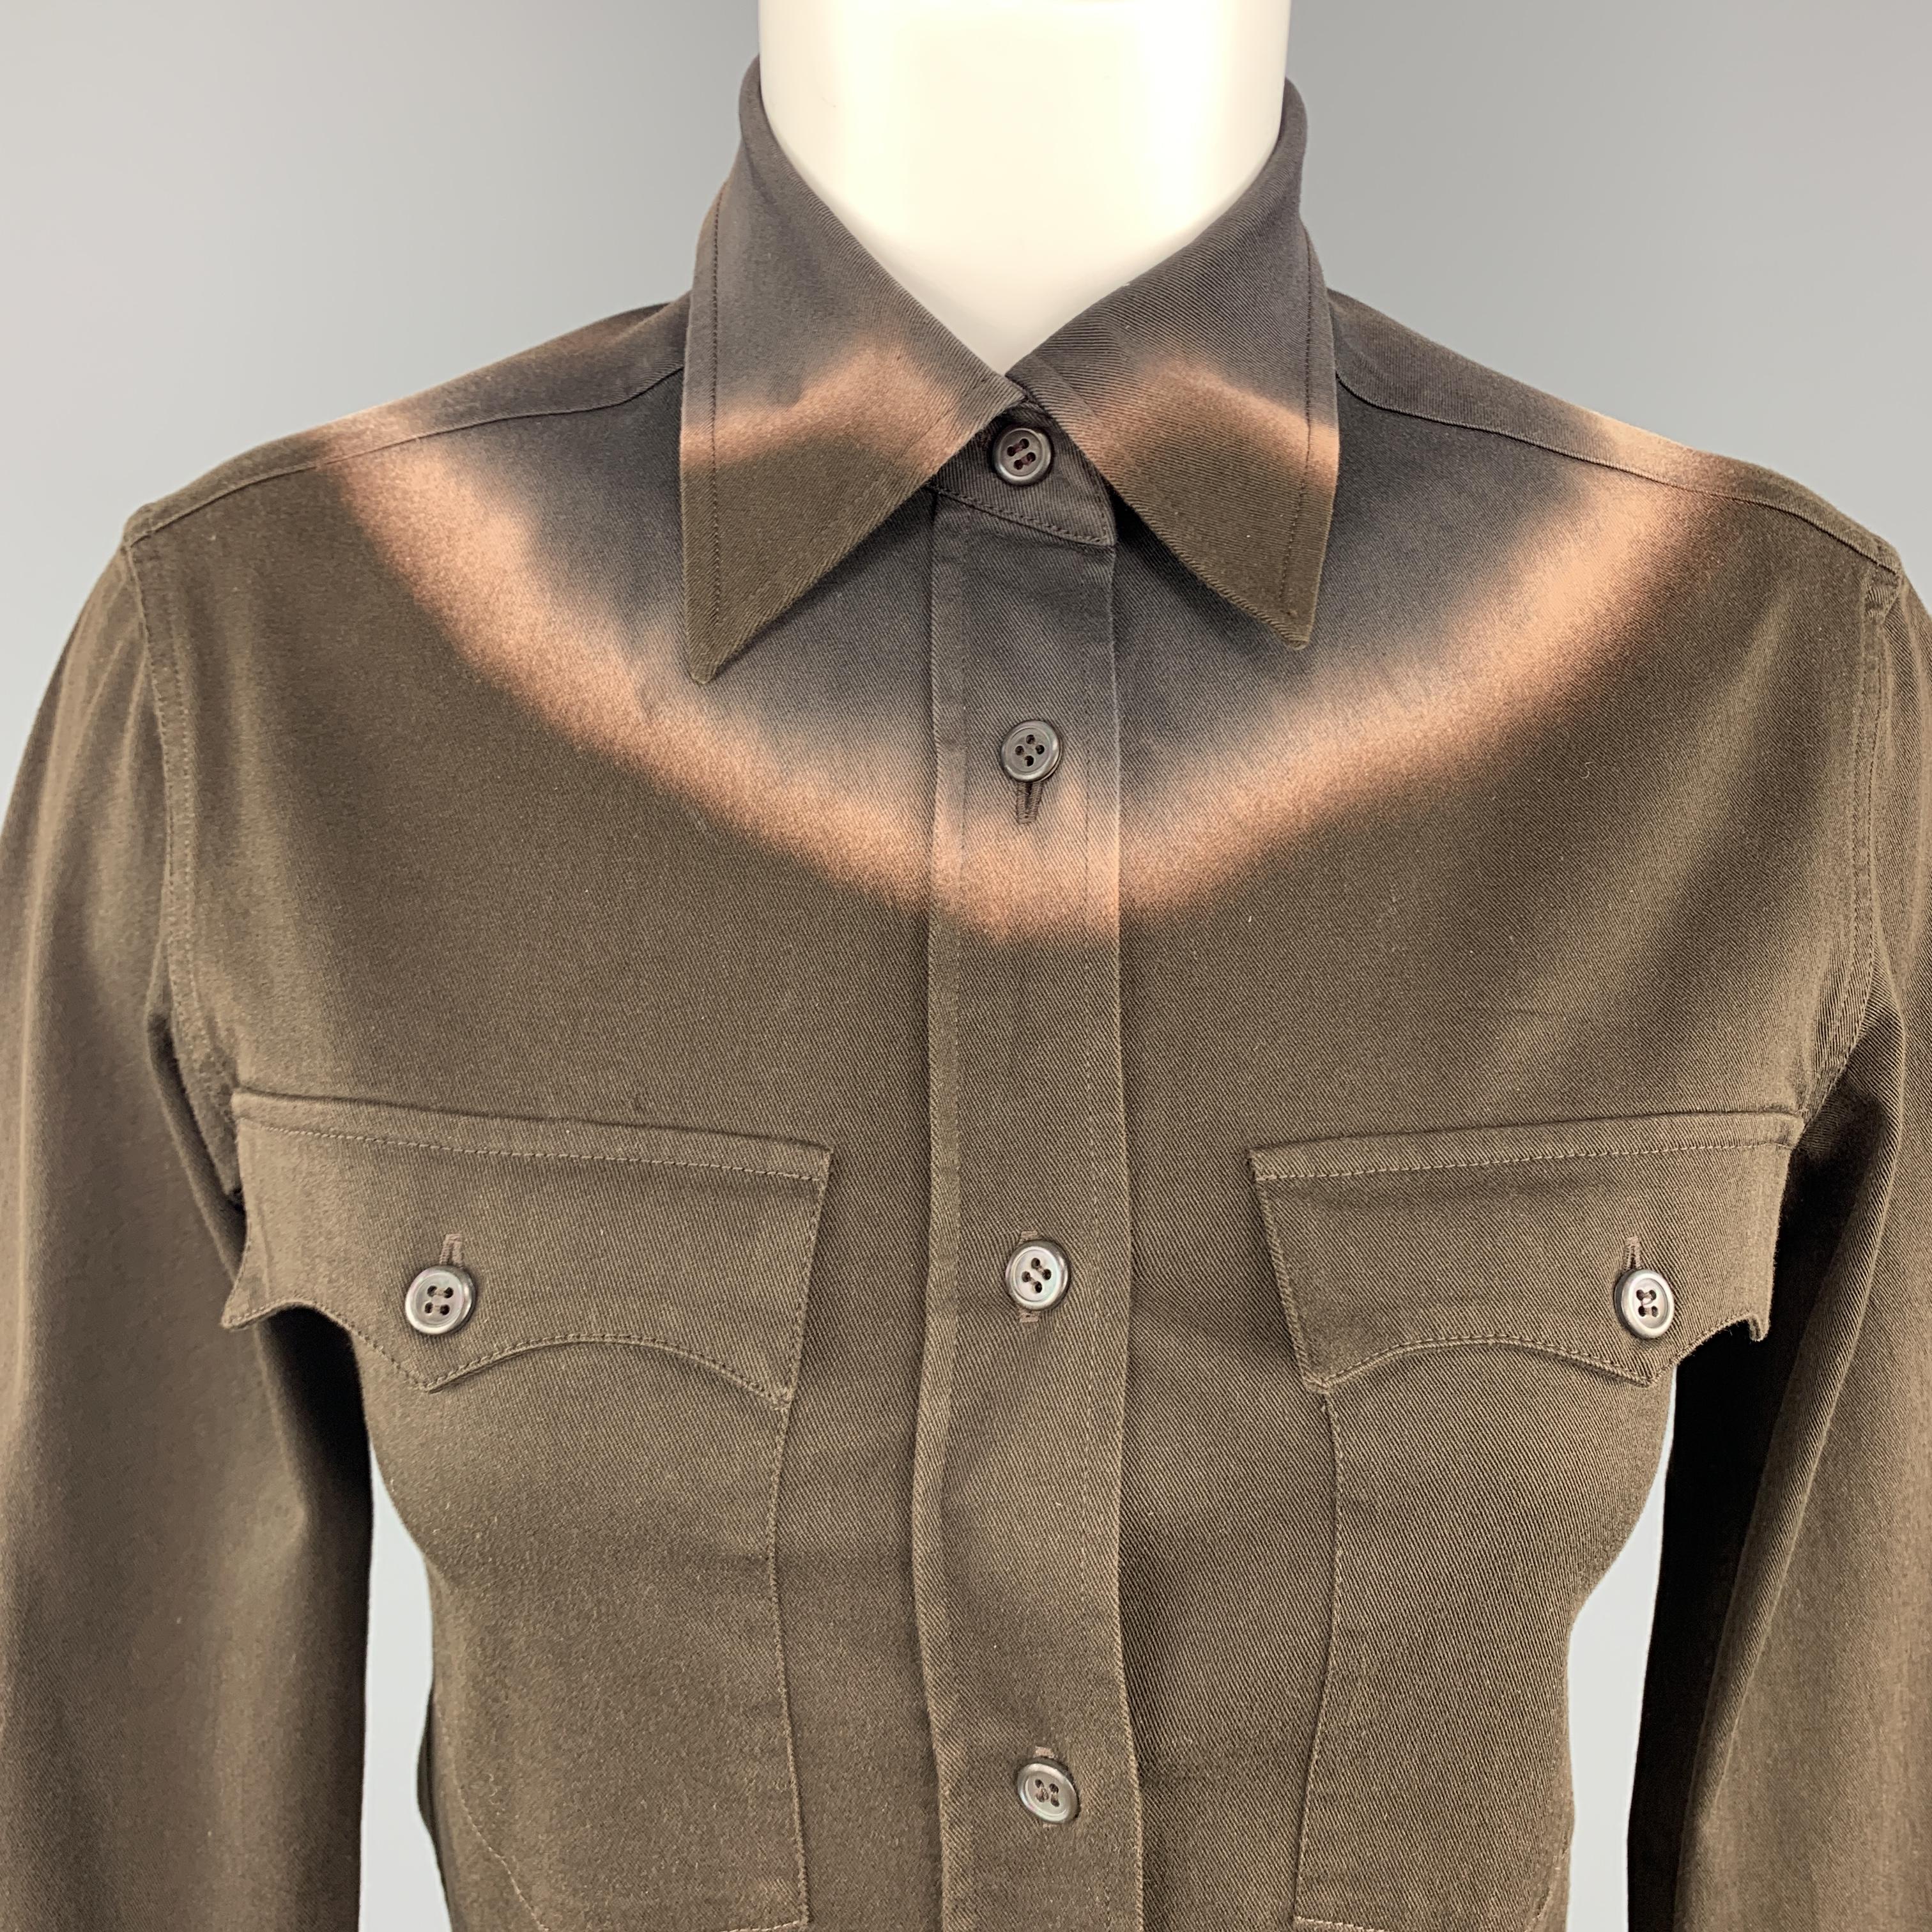 PRADA top comes in brown stretch cotton twill with a pointed collar, patch flap pockets, and tie die effect detail along top. Made in Italy.
 
Very Good Pre-Owned Condition.
Marked: IT 38
 
Measurements:
 
Shoulder: 14 in.
Bust: 34 in.
Sleeve: 23